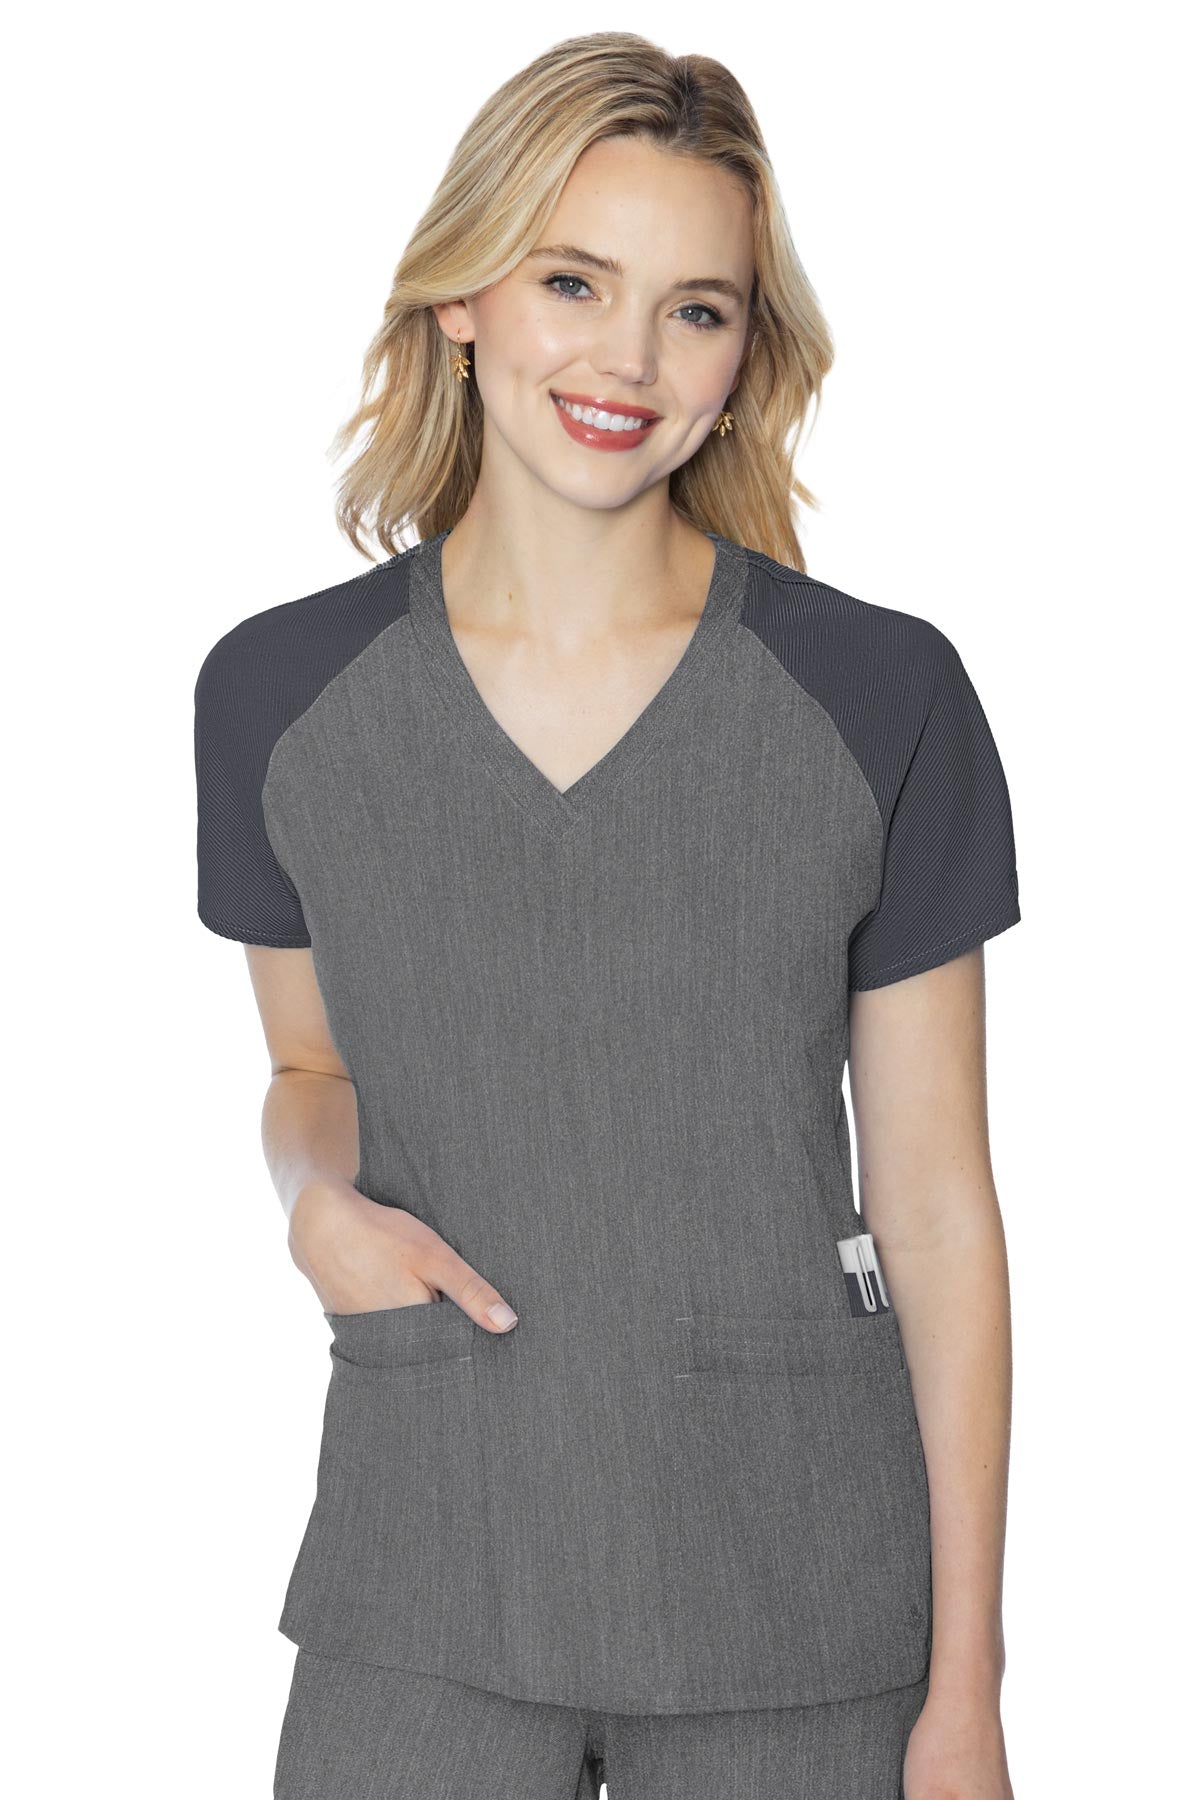 Med Couture Slate TOP